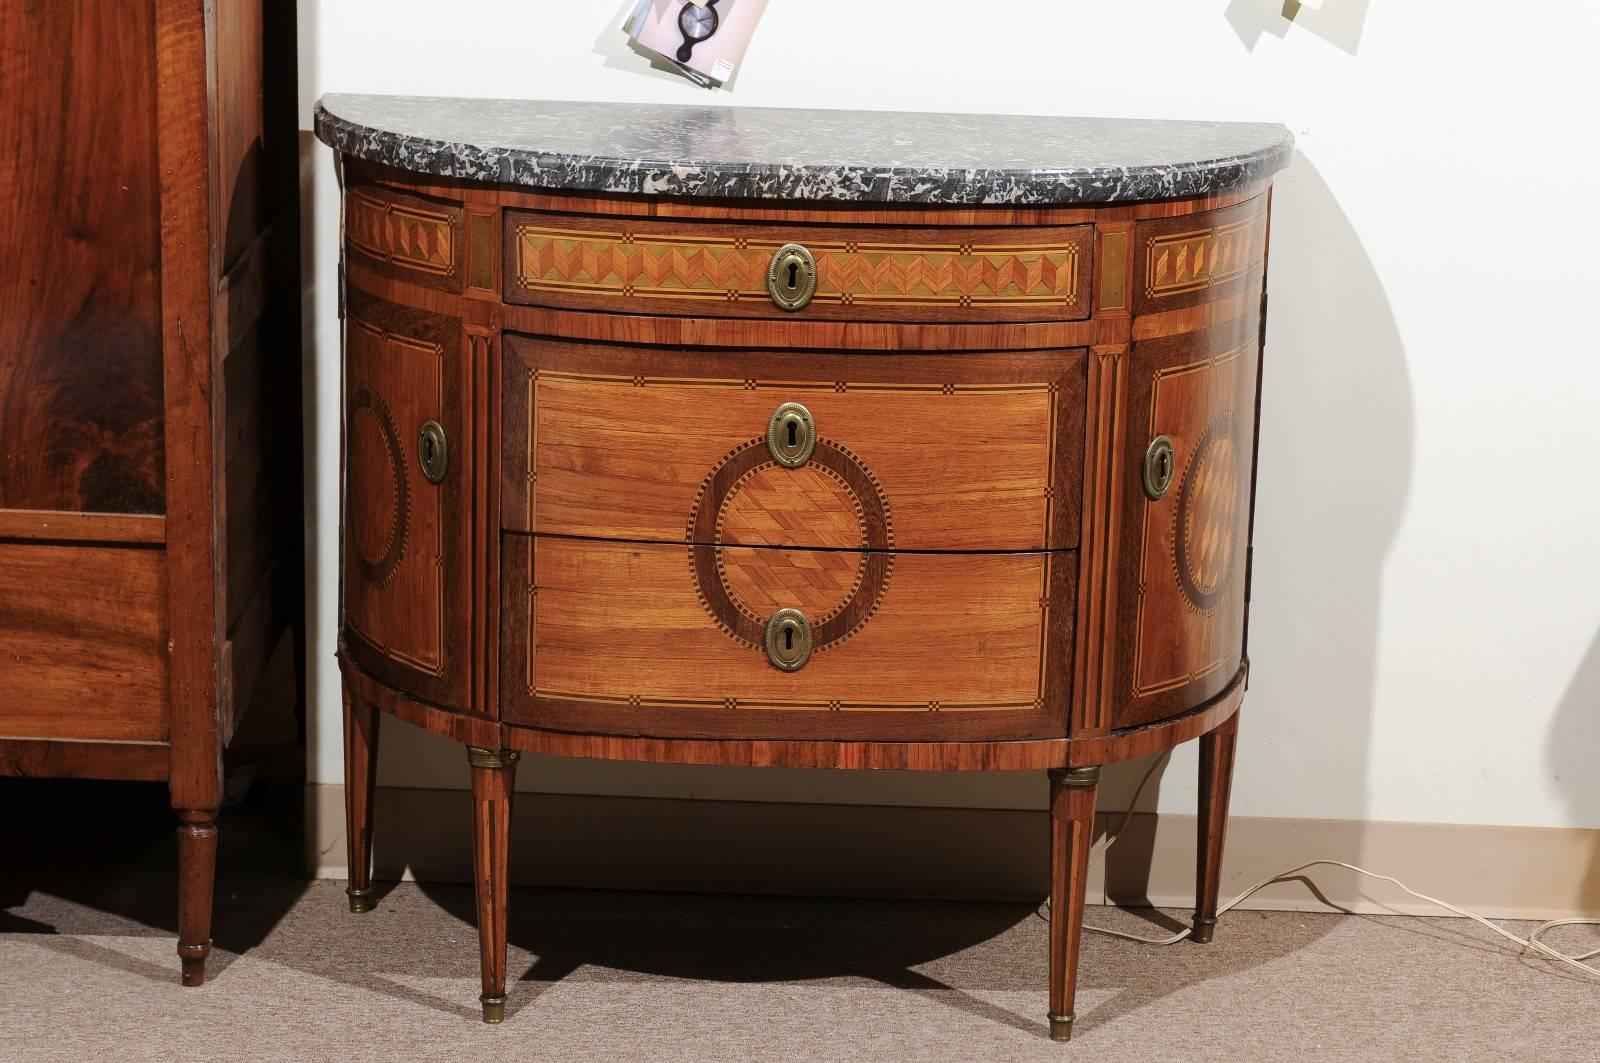 Louis XVI period parquetry inlaid commode in demilune shape with three drawers flanked by two cabinet doors with fitted interior and grey marble top, France, 18th century. The inlay in boxwood and ebony on the legs and beside the drawers creates the